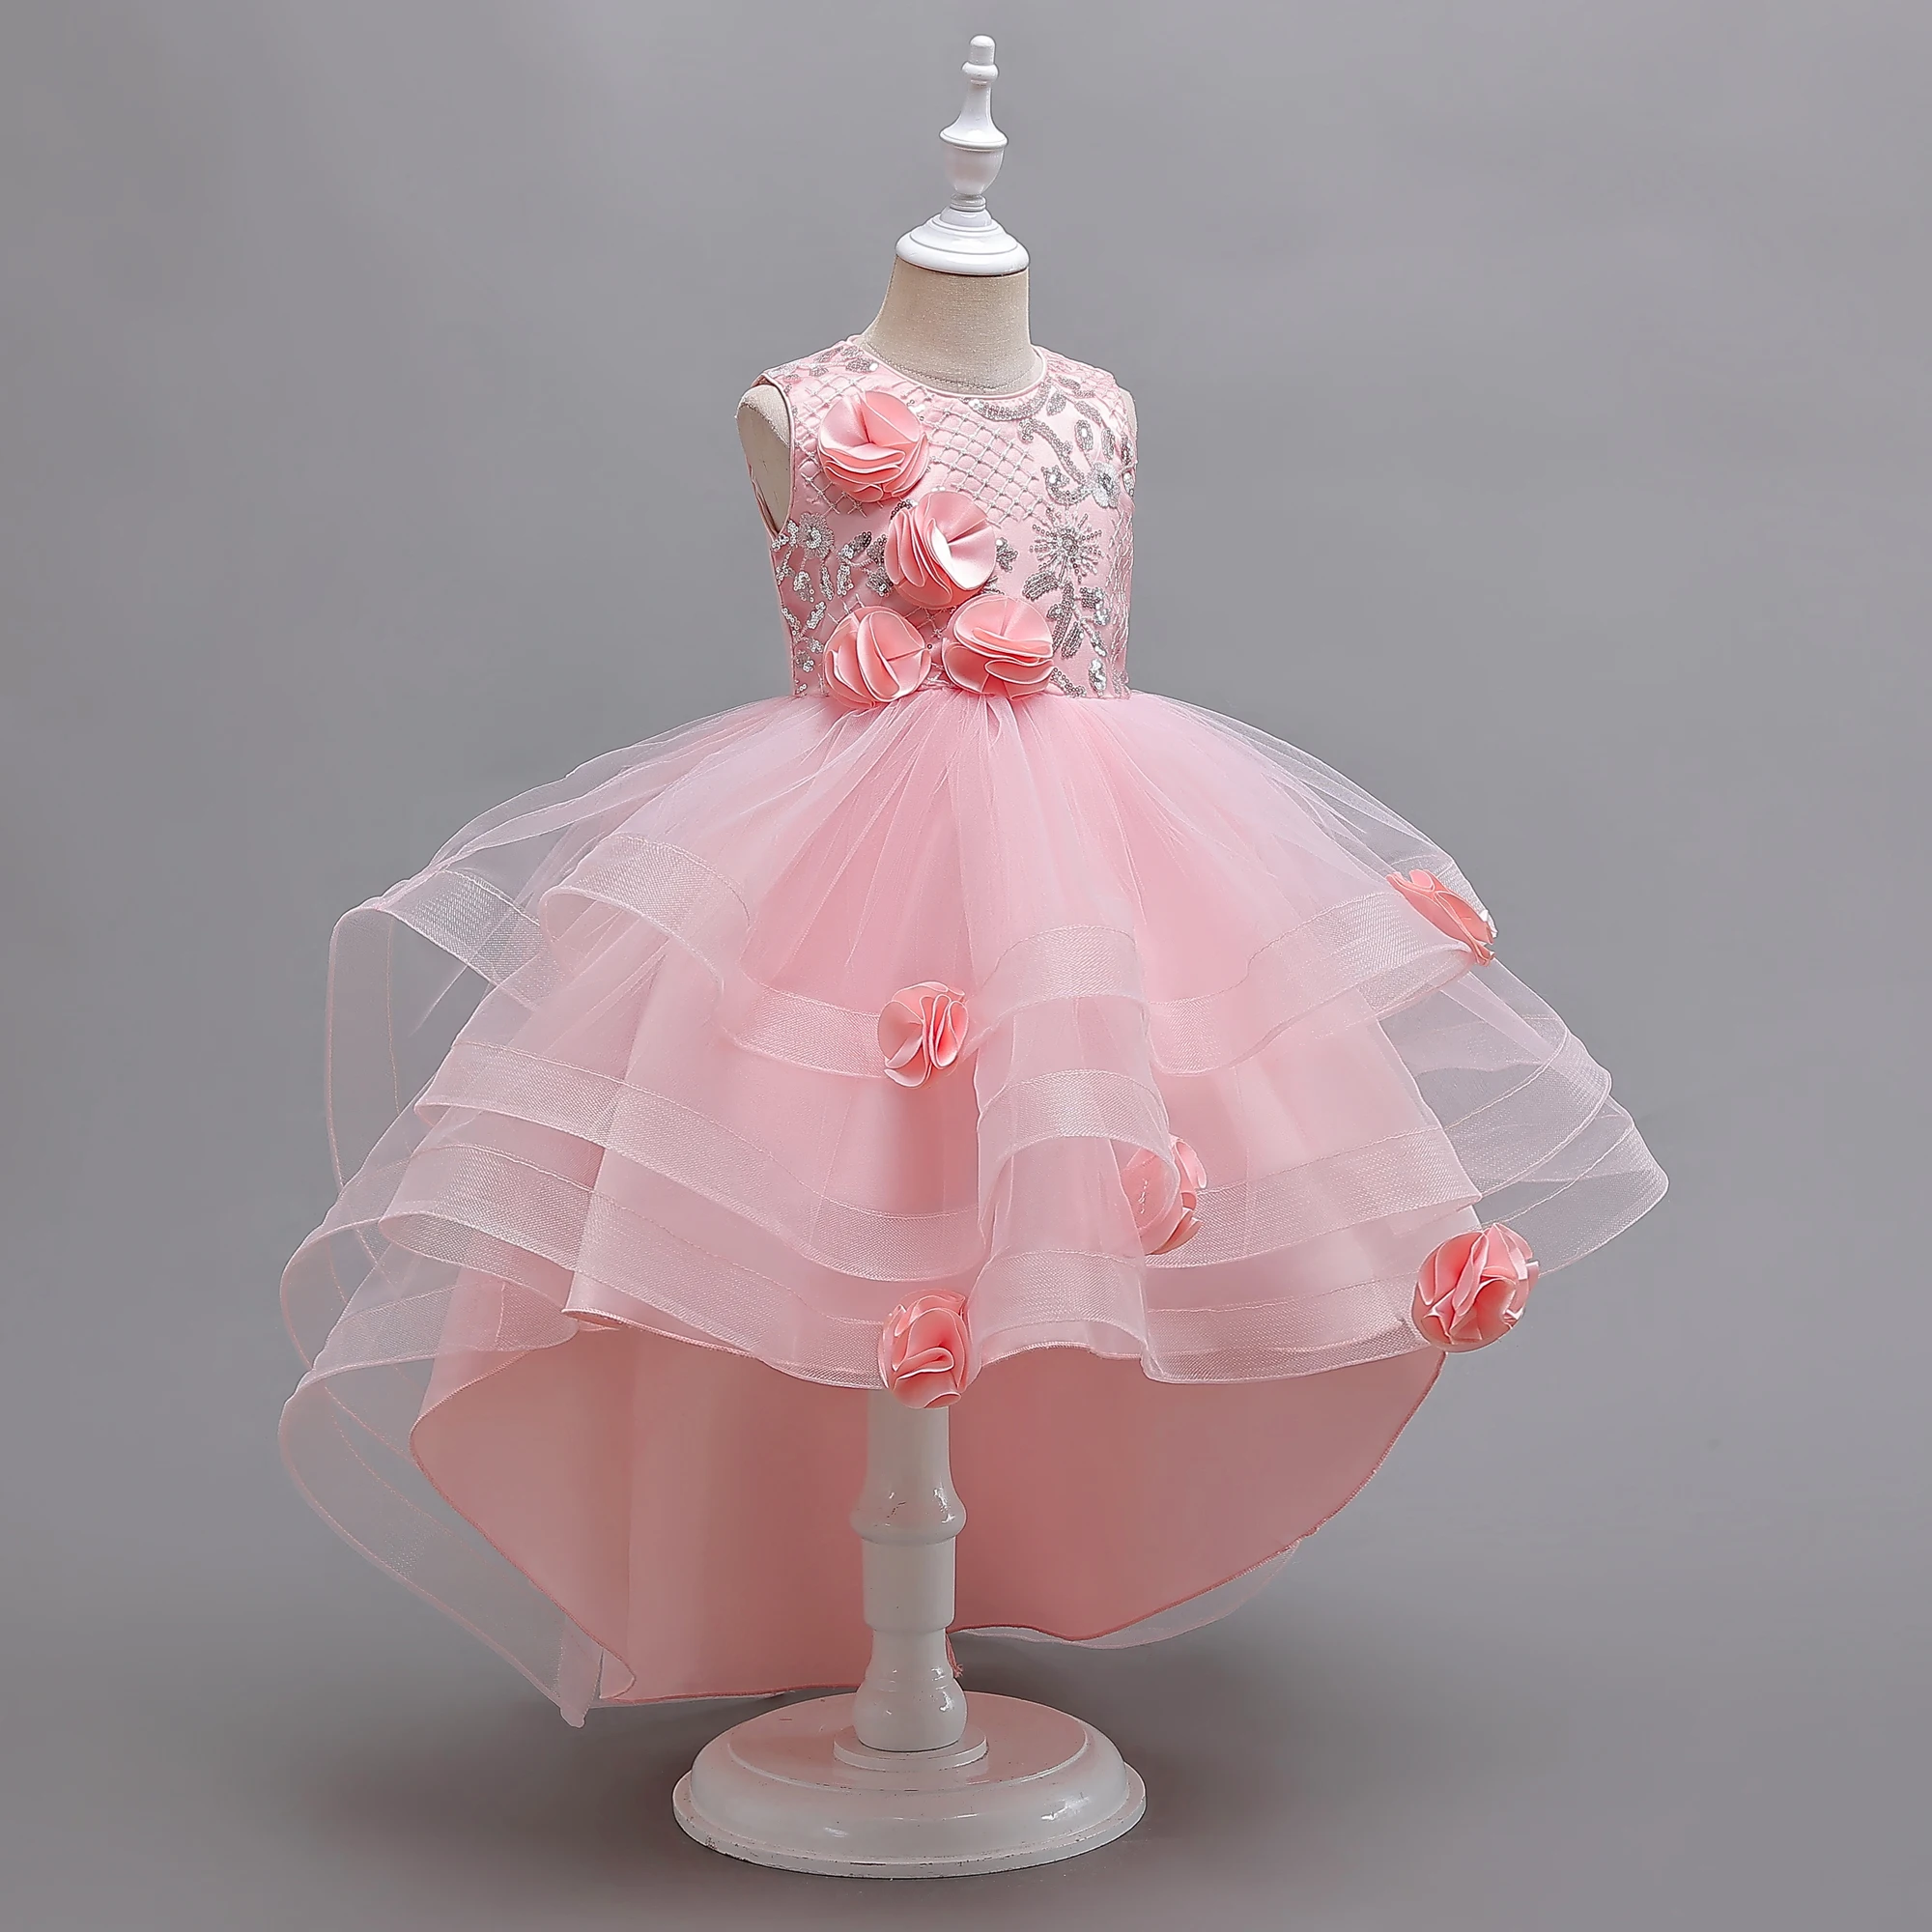 

Girls Party Dresses 4 Colors 110cm-160cm Princess Trailing Skirt Children Wedding Dress Birthday Piano Ball Gown Pink